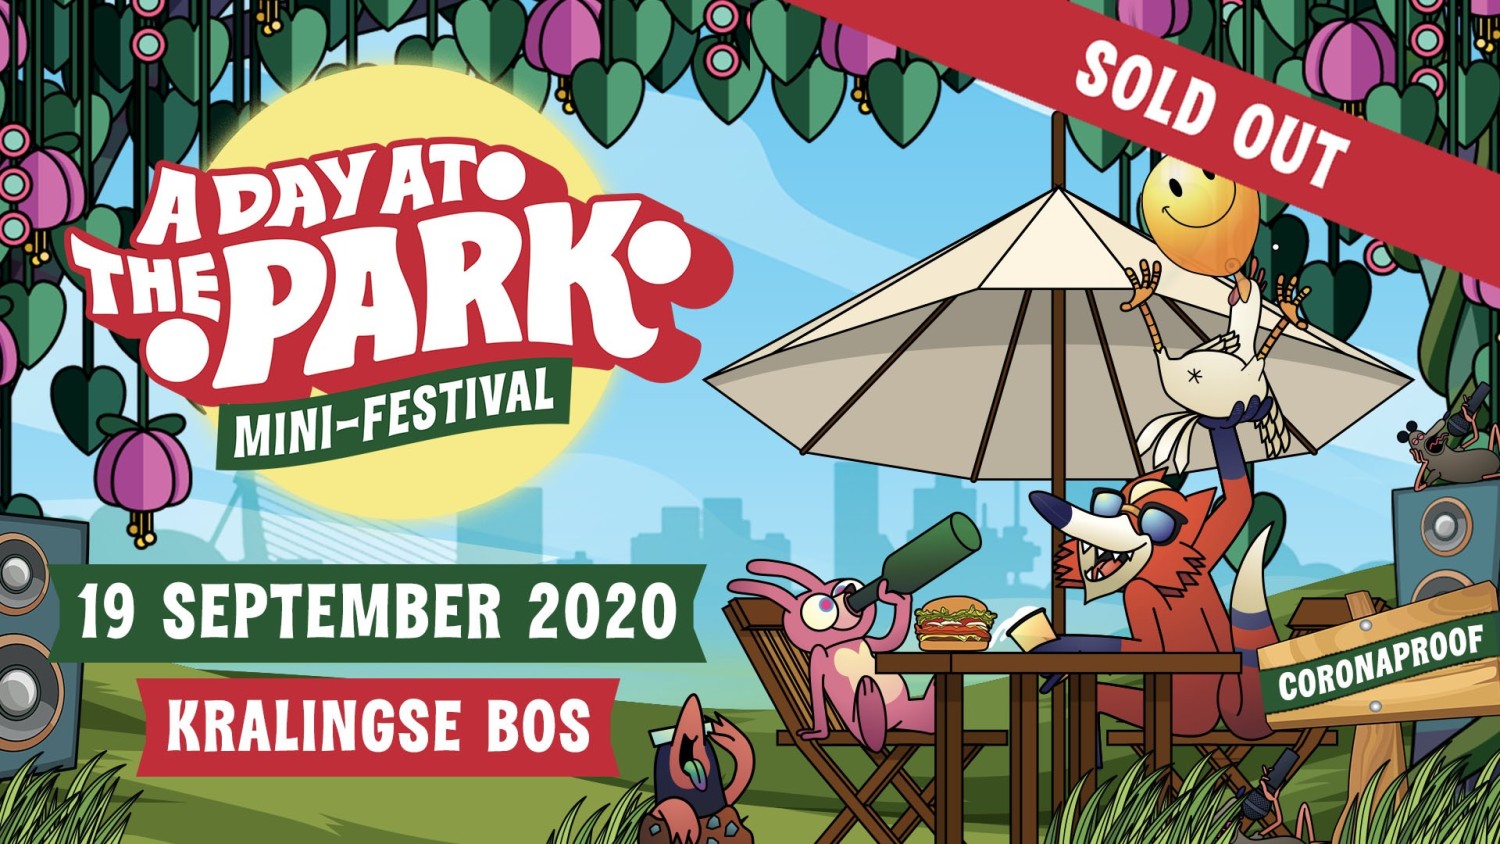 Party nieuws: A Day at the Park 2020 binnen no-time uitverkocht